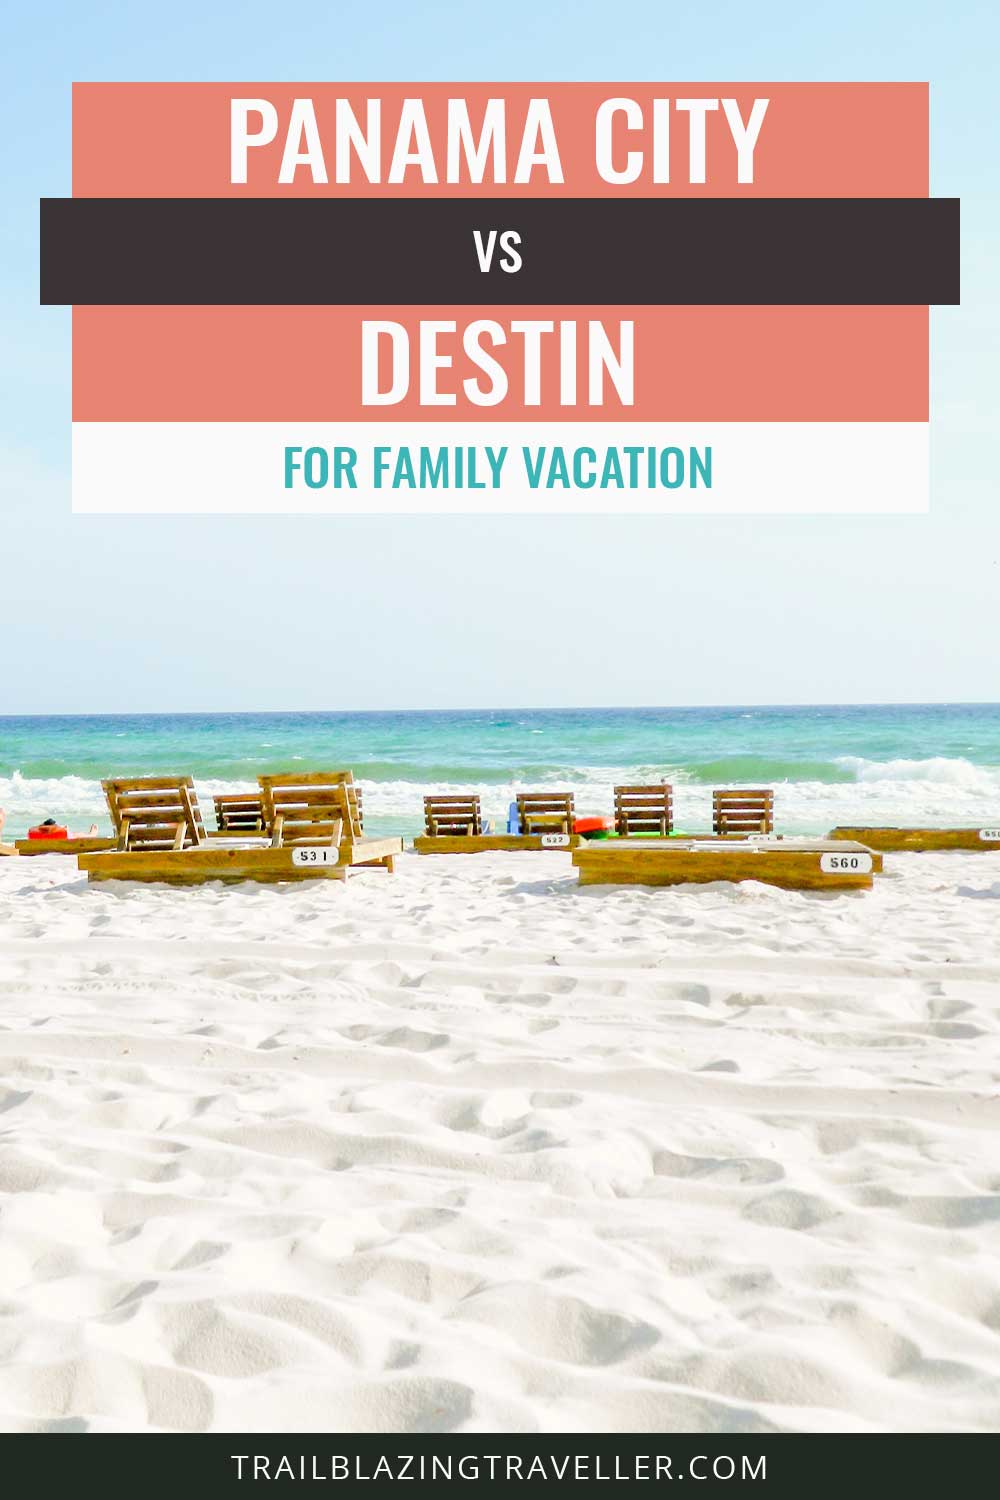 A sandy beach with some wooden chairs on it - Panama City vs. Destin for Family Vacation.